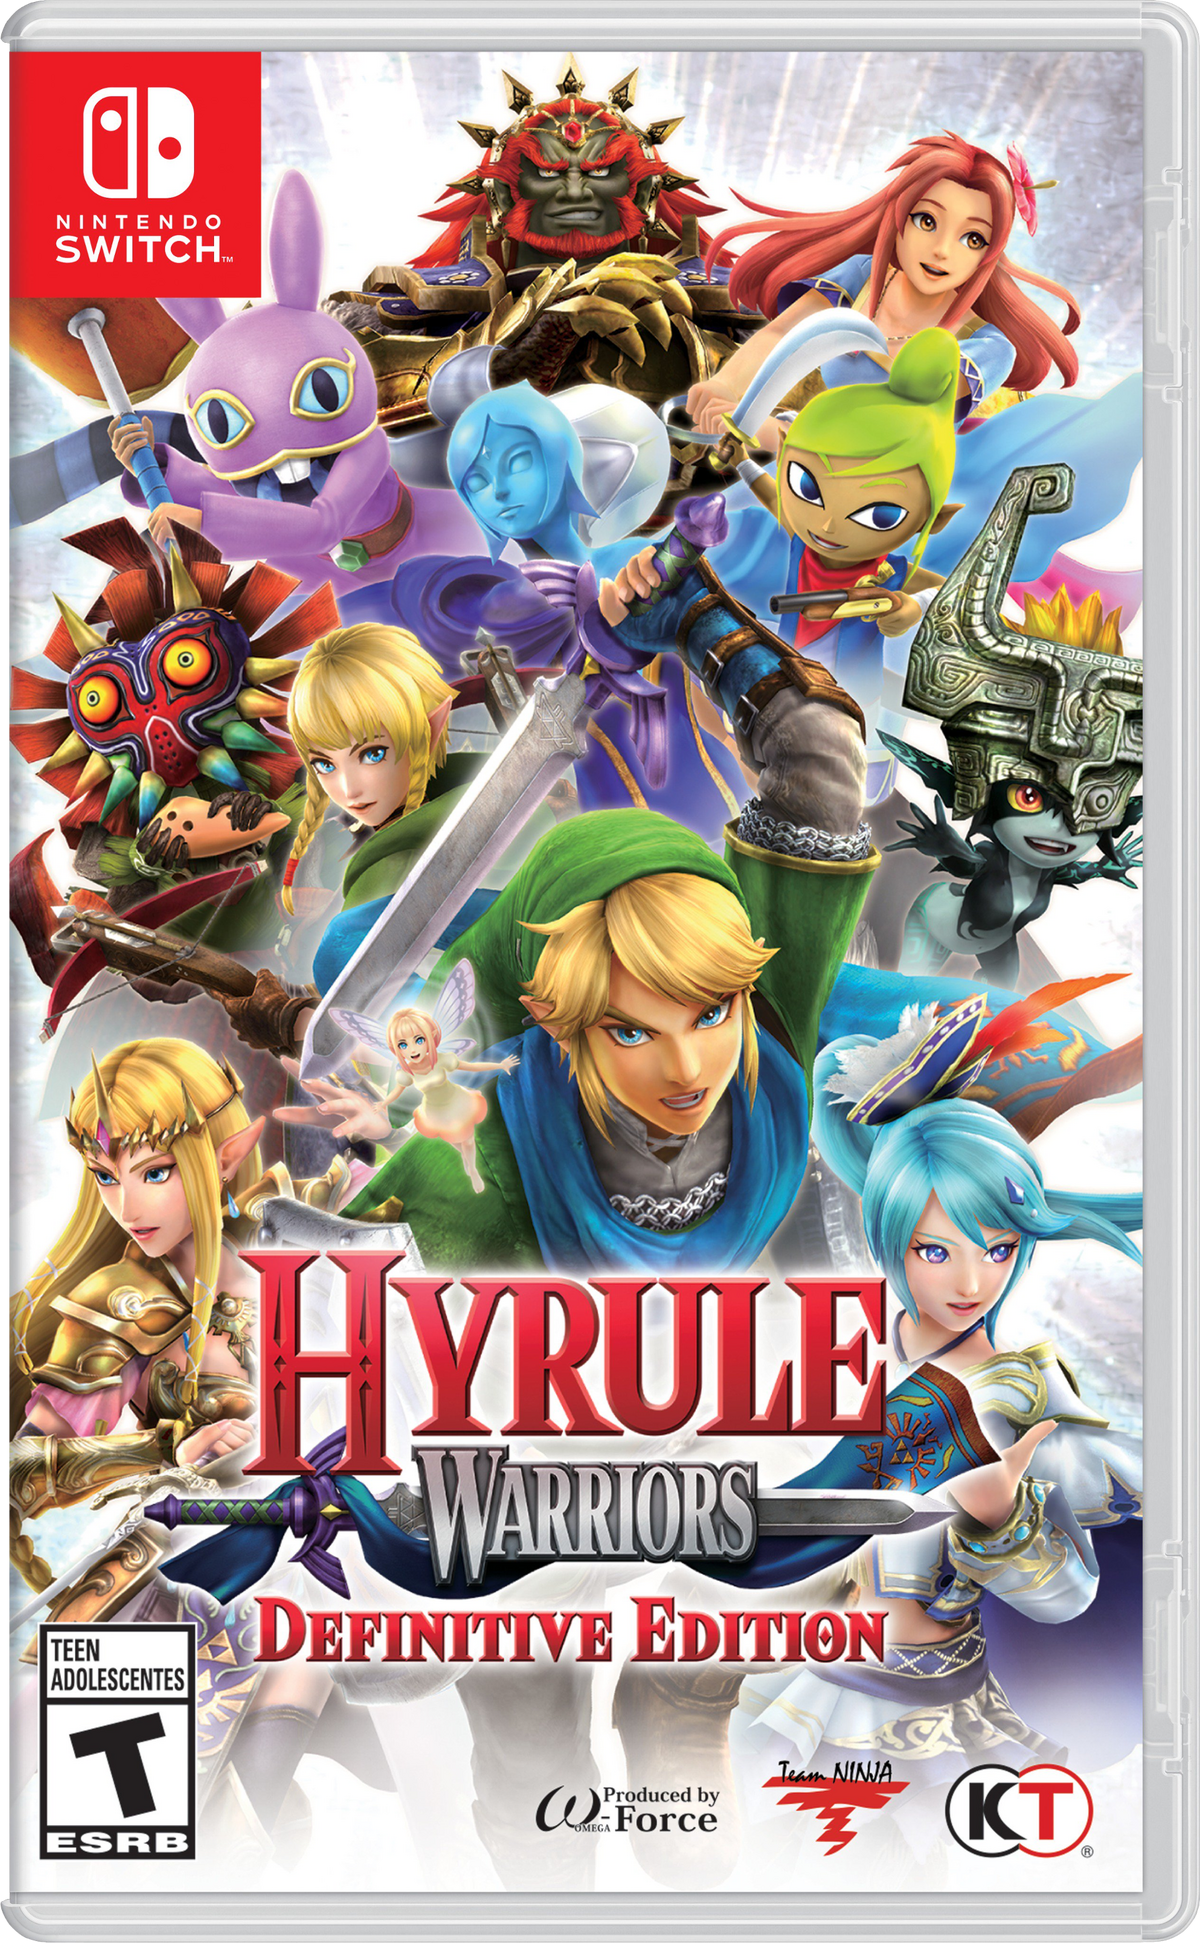 Guide] Hyrule Warriors Definitive Edition Character Unlock Guide